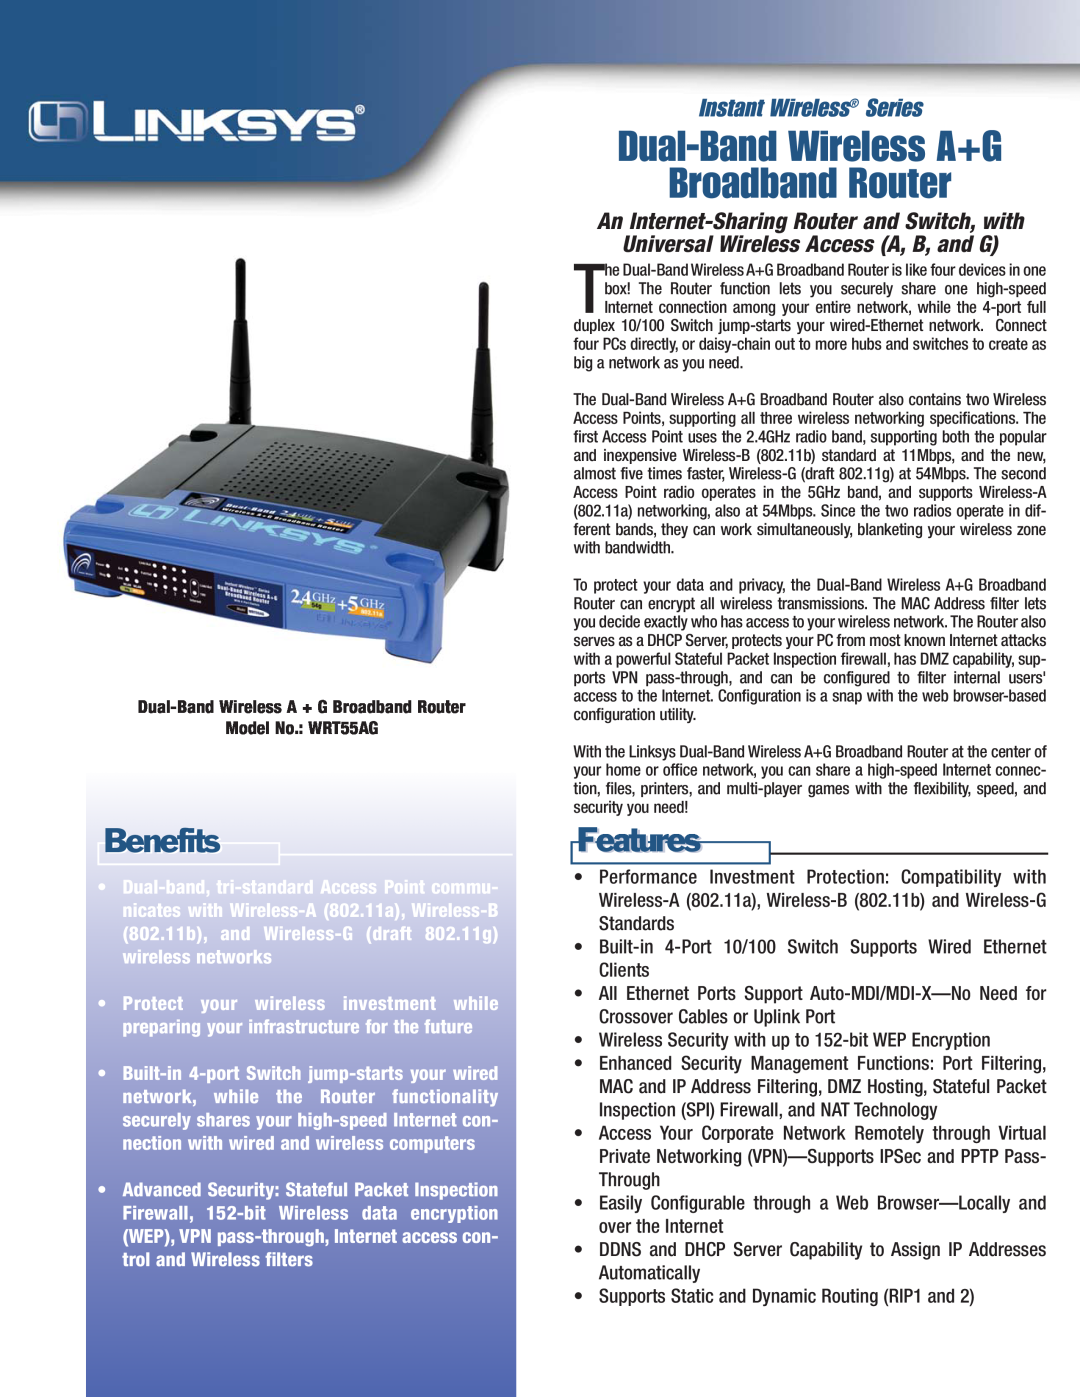 Linksys WRT55AG specifications Dual-Band Wireless A+G Broadband Router, Benefits, Features, Instant Wireless Series 